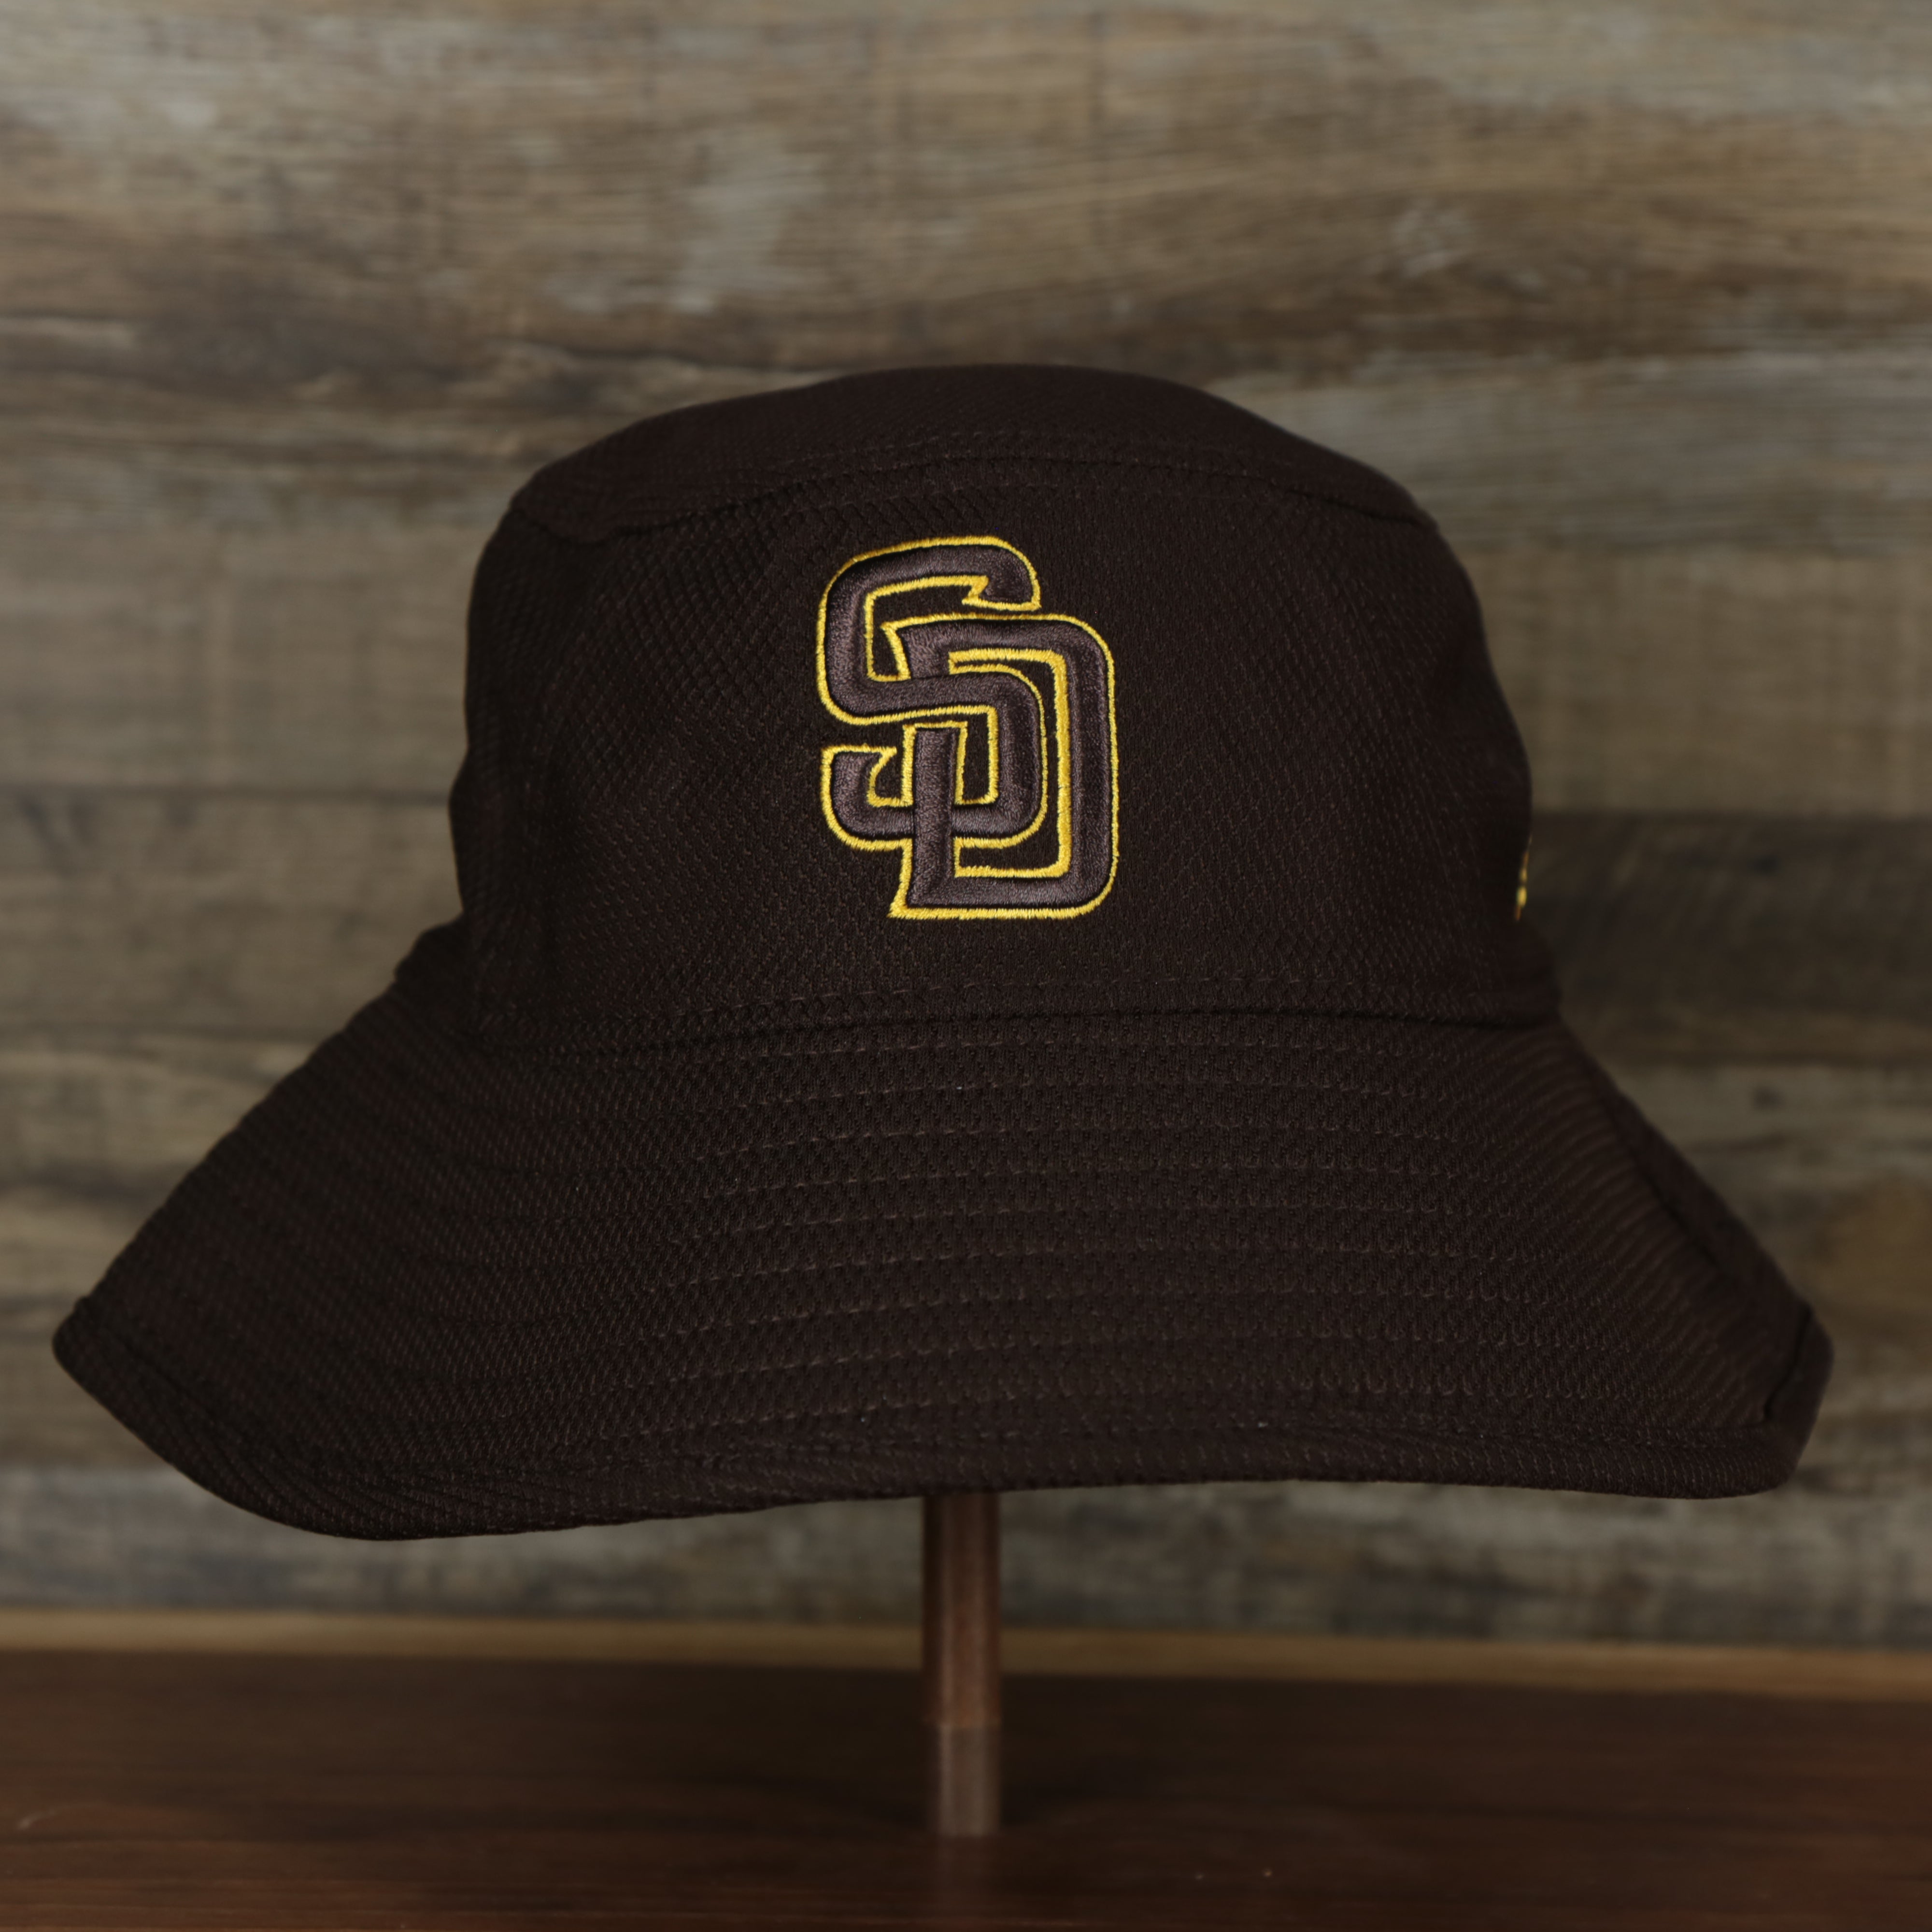 San Diego Padres Bucket Hat Reversible to Solid Brown Sizes 